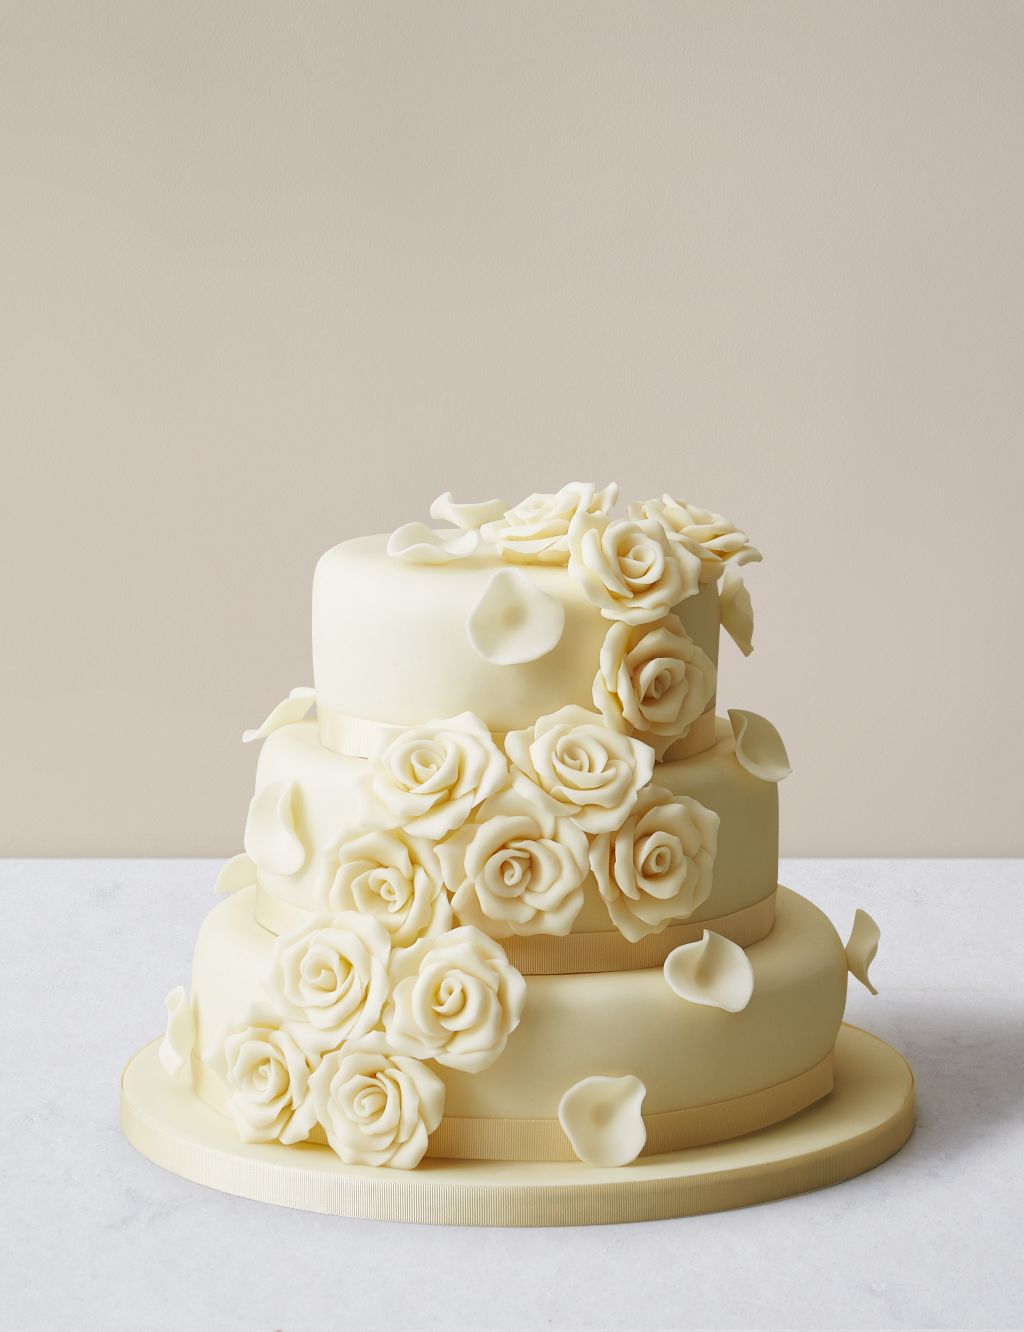 Chocolate Rose Wedding Cake with White Chocolate Icing - Assorted Flavours (Serves 150) Last order date 26th March 3 of 4